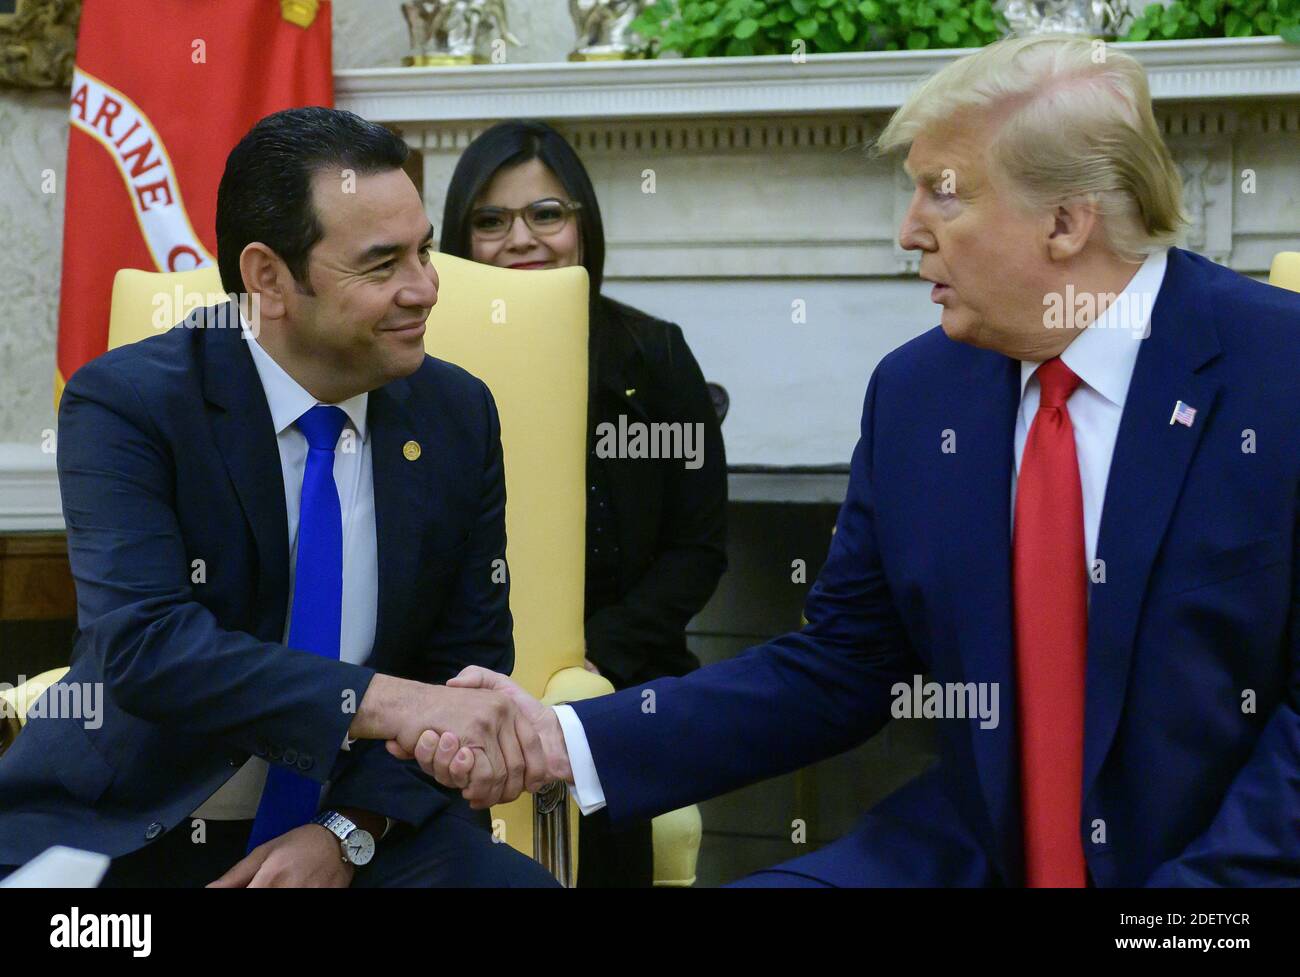 United States President Donald J. Trump shakes hands with President Jimmy Morales of the Republic of Guatemala in the Oval Office of the White House in Washington, DC on Tuesday, December 17, 2019. Photo by Ron Sachs/CNP/ABACAPRESS.COM Stock Photo